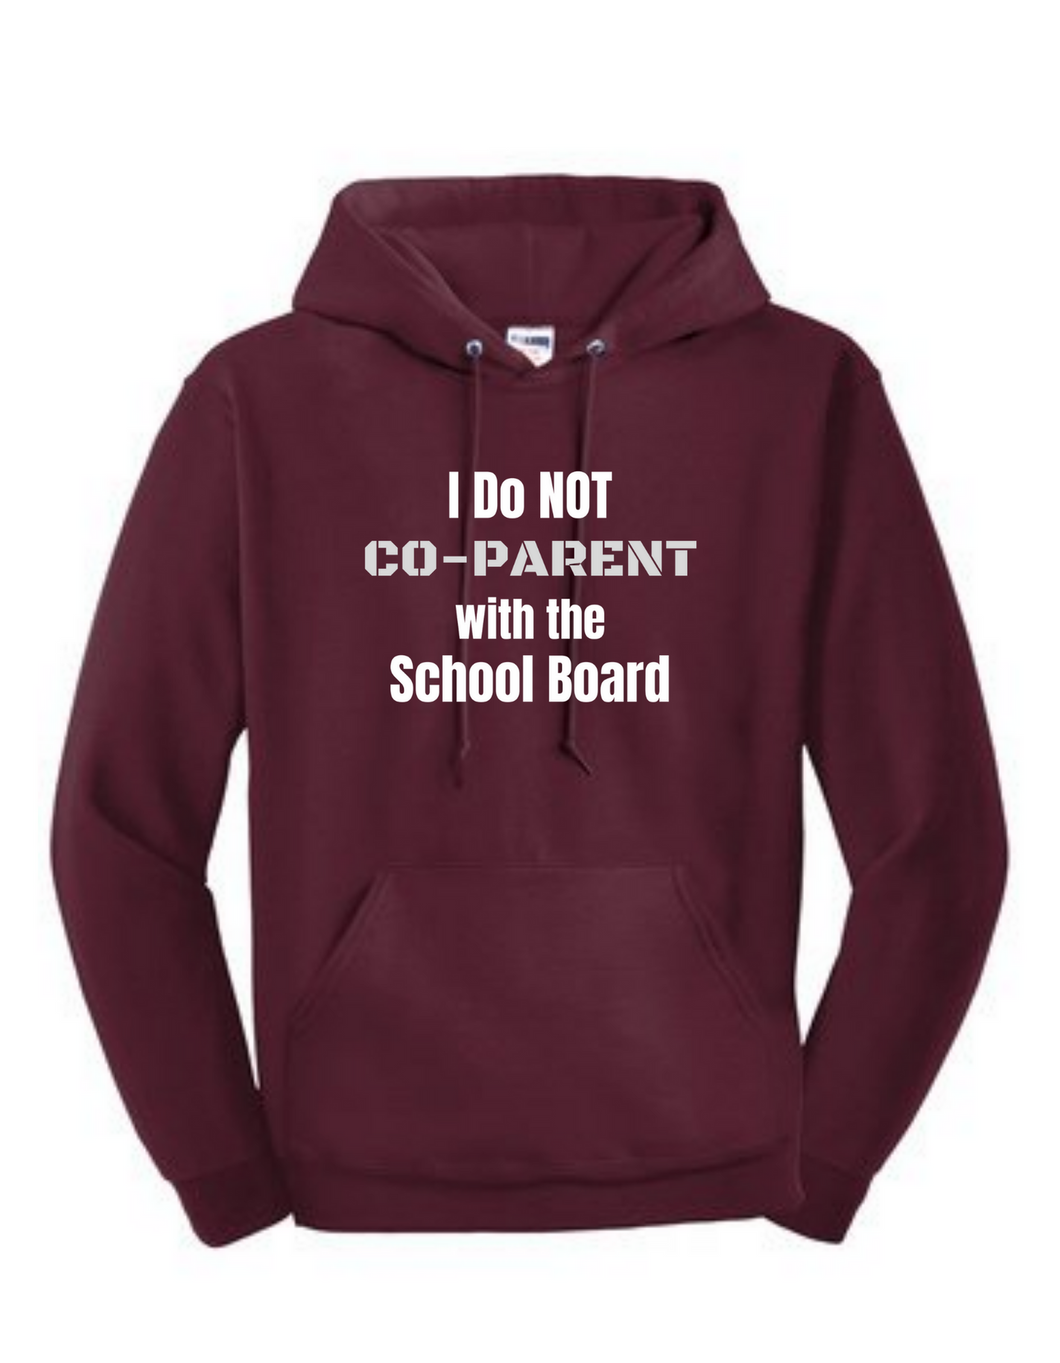 I DO NOT Co-Parent w/ the School Board Hoodie